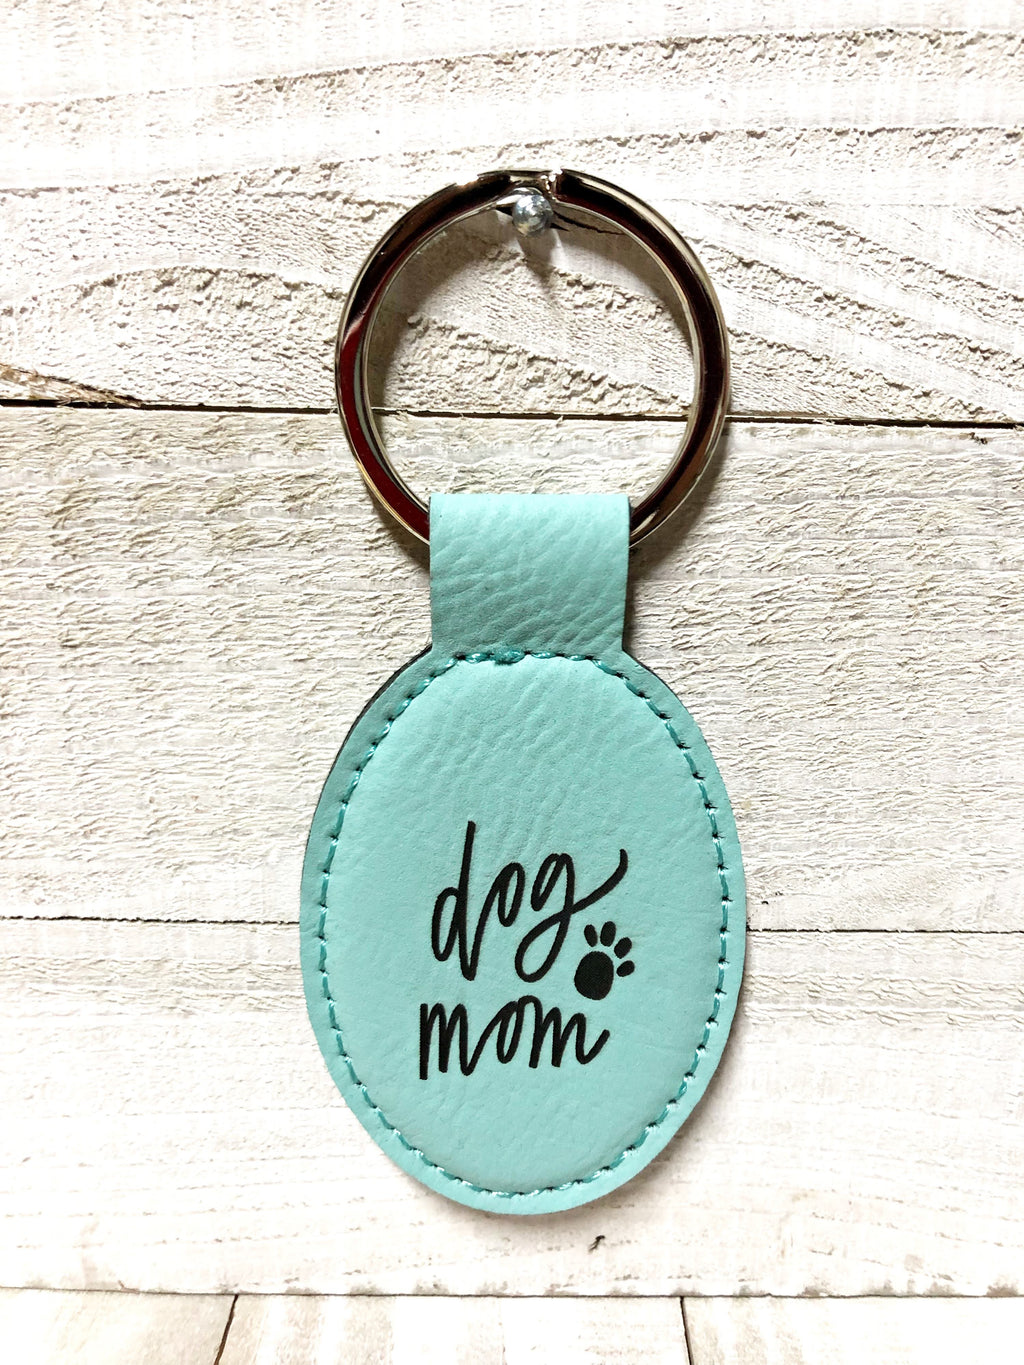 Engraved Oval Key Chain- Dog Mom  Teal Blue